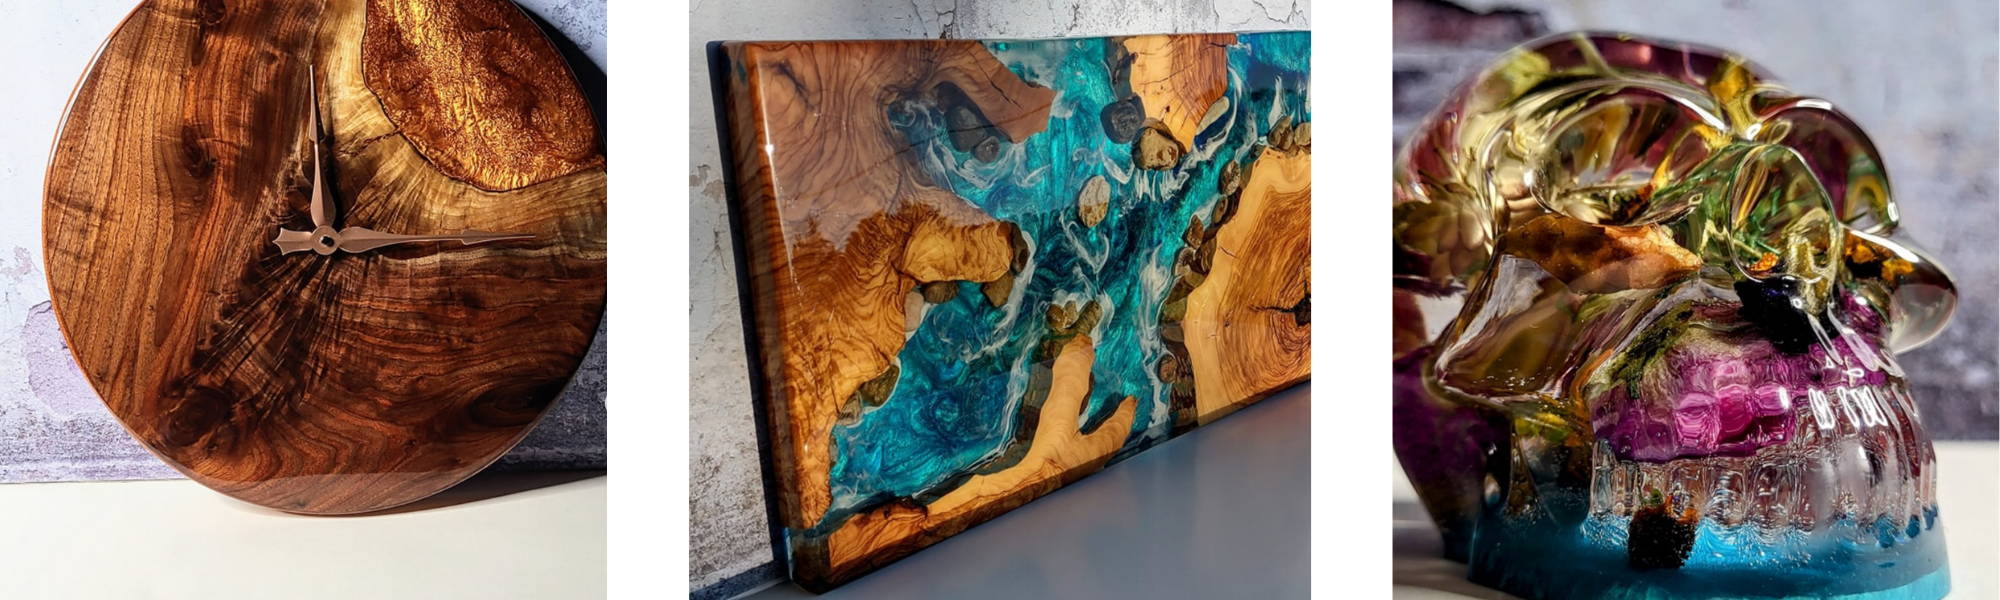 epoxy resin projects including a high gloss wall clock, a live edge river table, and a resin skull with flowers